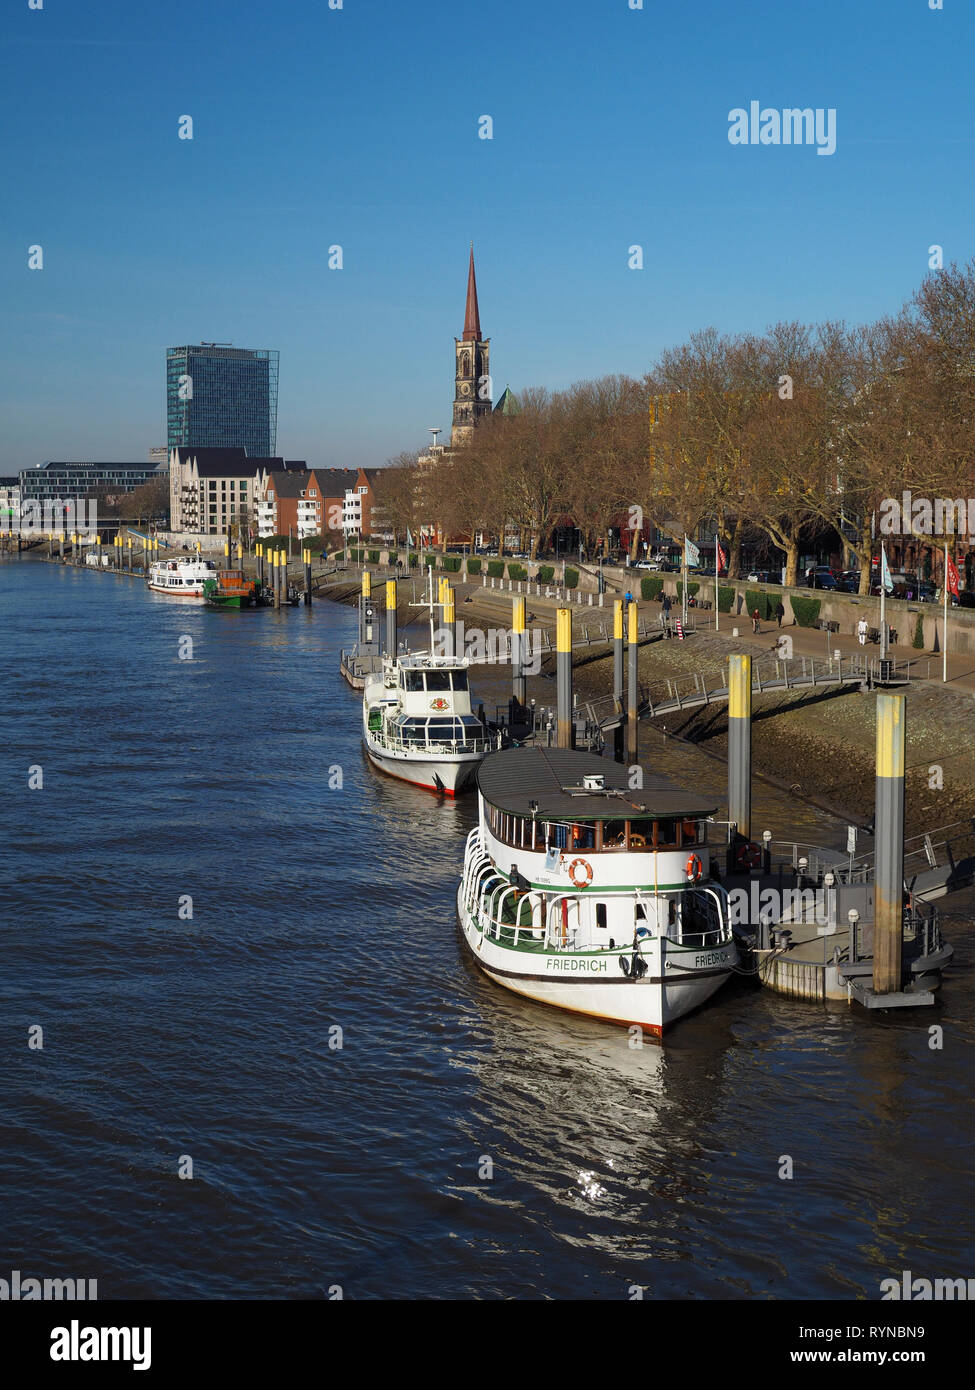 Bremen, Germany - February 24th, 2019 - Pier with several moored vessels with Weser Tower and St. Stephani church in the background Stock Photo